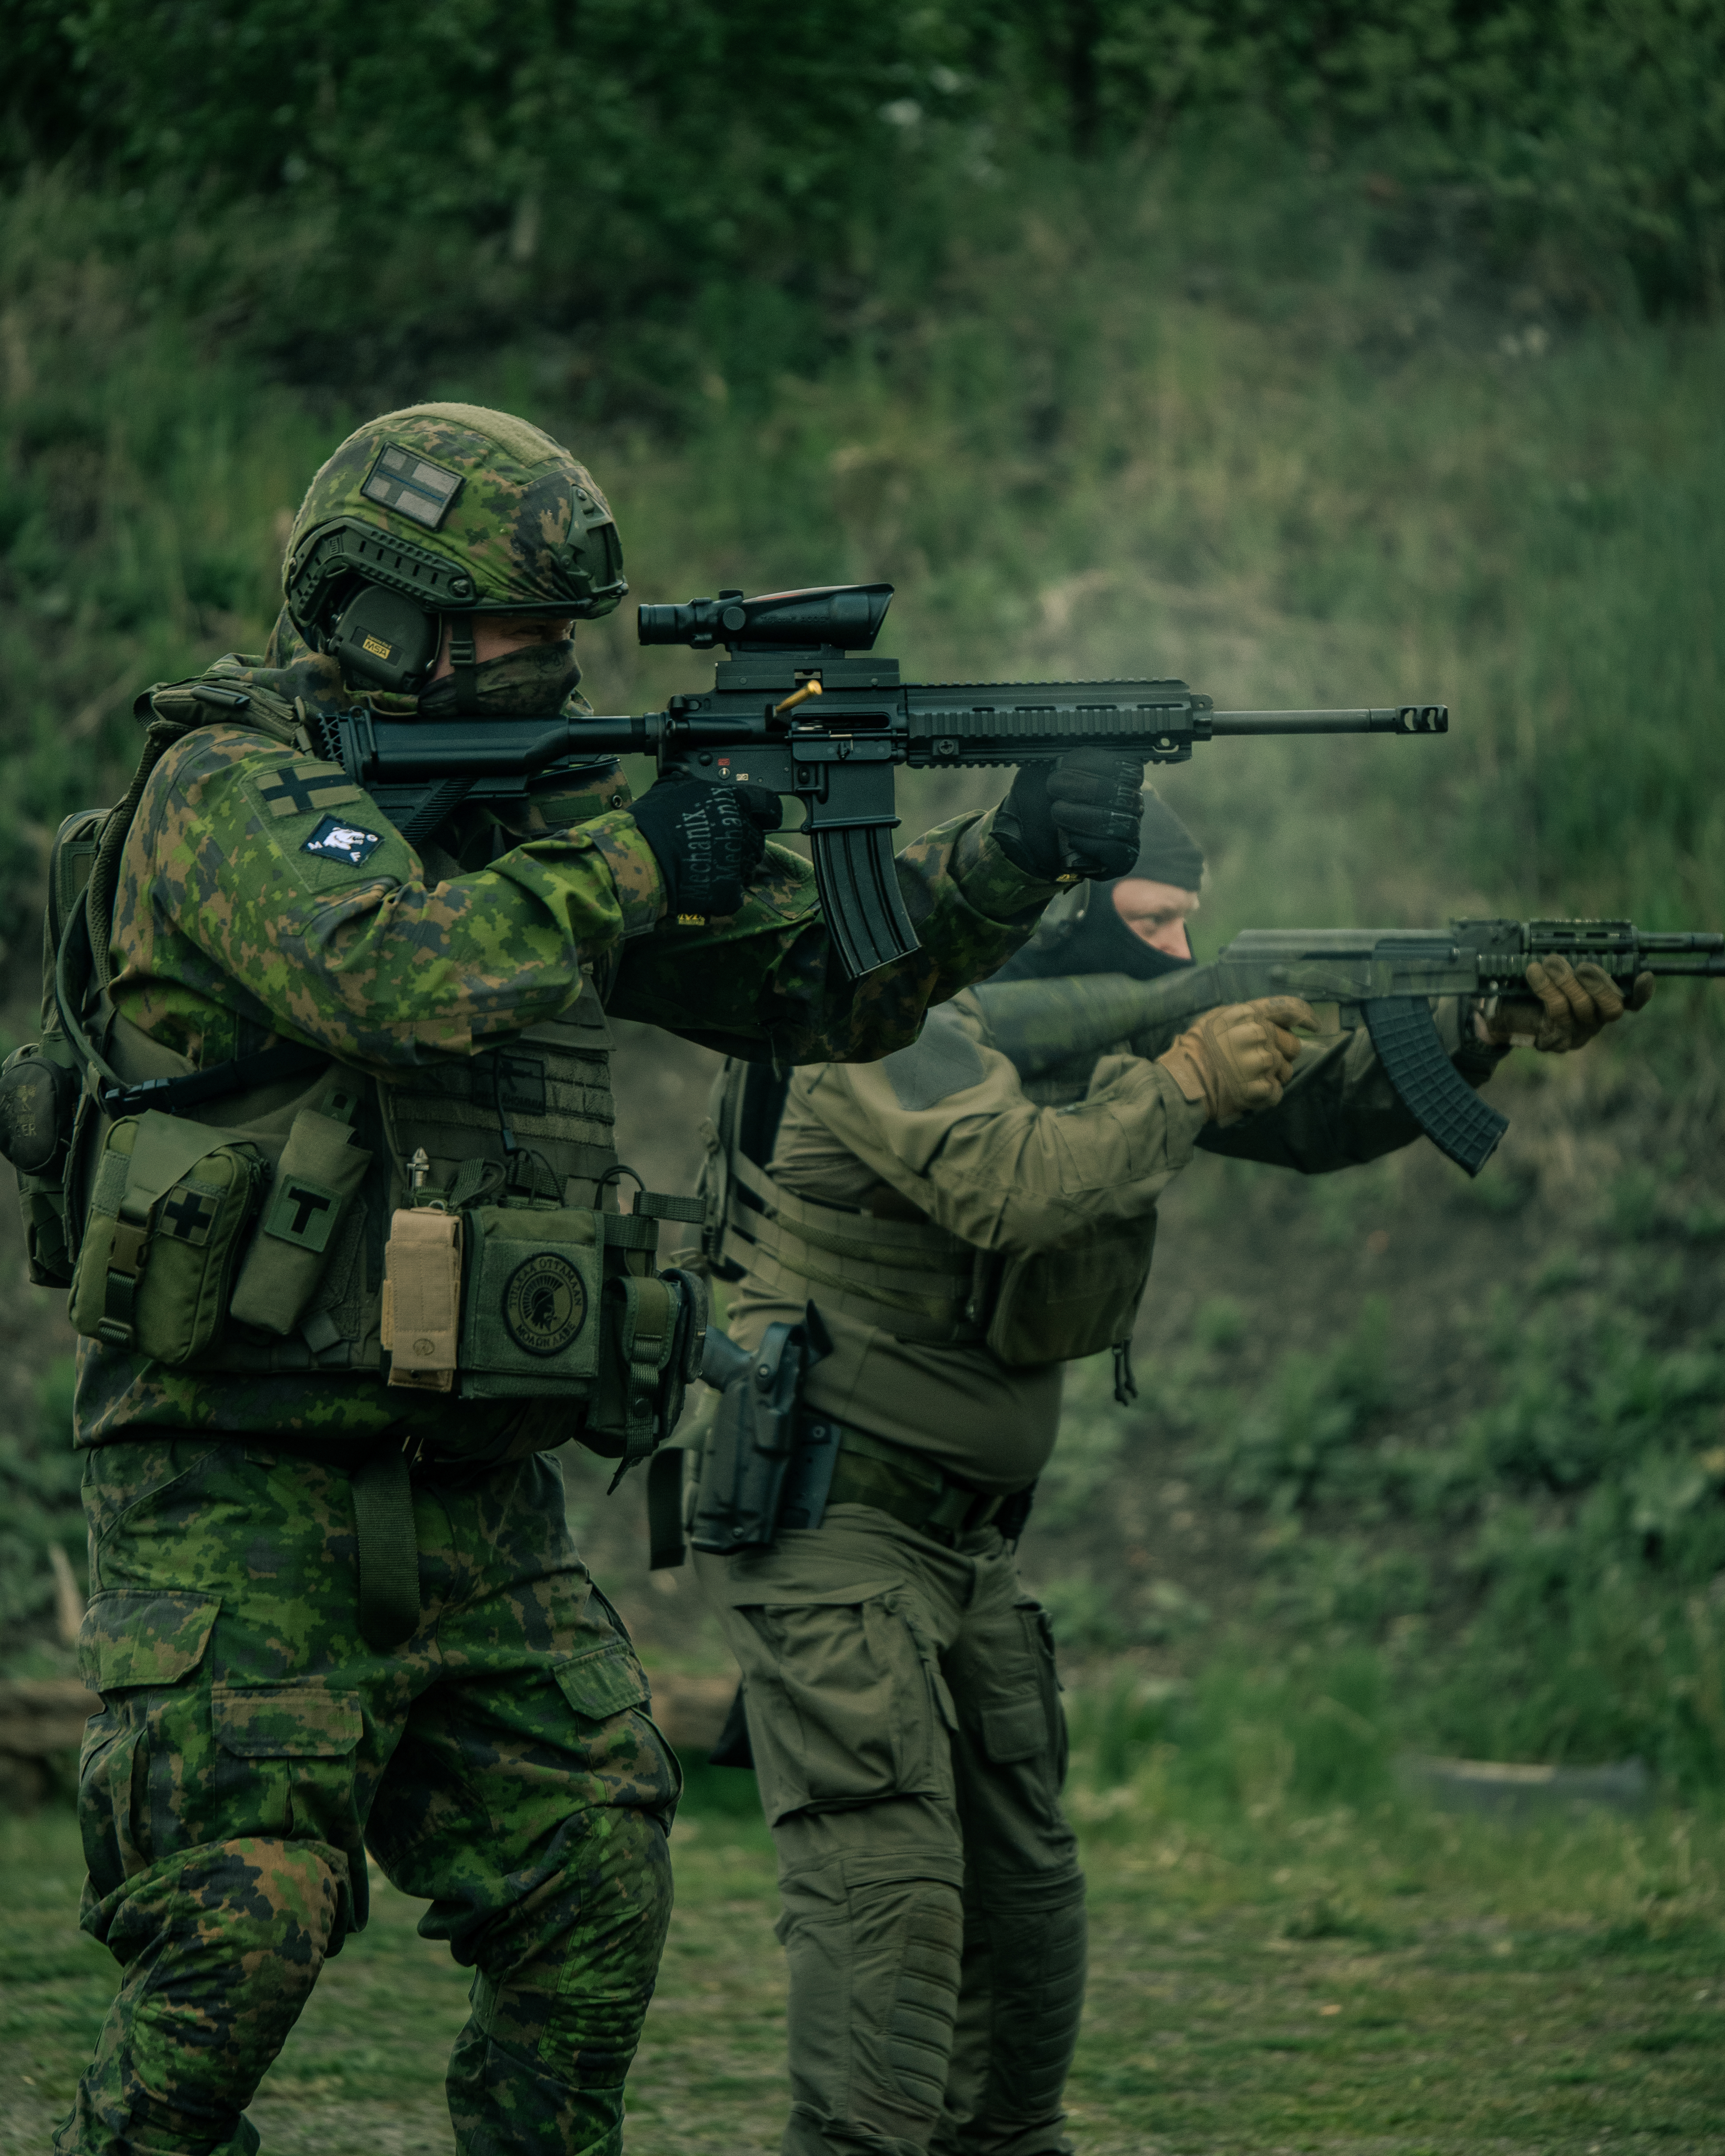 Two men with rifles in a high stance are shooting on a shooting range. One of men has a ak47 rifle, he is wearing a M05 camo jacket, M05 camo pants, a plate carrier, boots and a protection group denmark pgd ballistic helmet. The other man is wearing a balaclava, earpro, a uf pro combat shirt, uf pro tactical pants, boots and a gun belt. He has a M4 AR15 Heckler & Koch 416 with a ACOG optic. Shell casings are flying through the air.  Finnish reservists